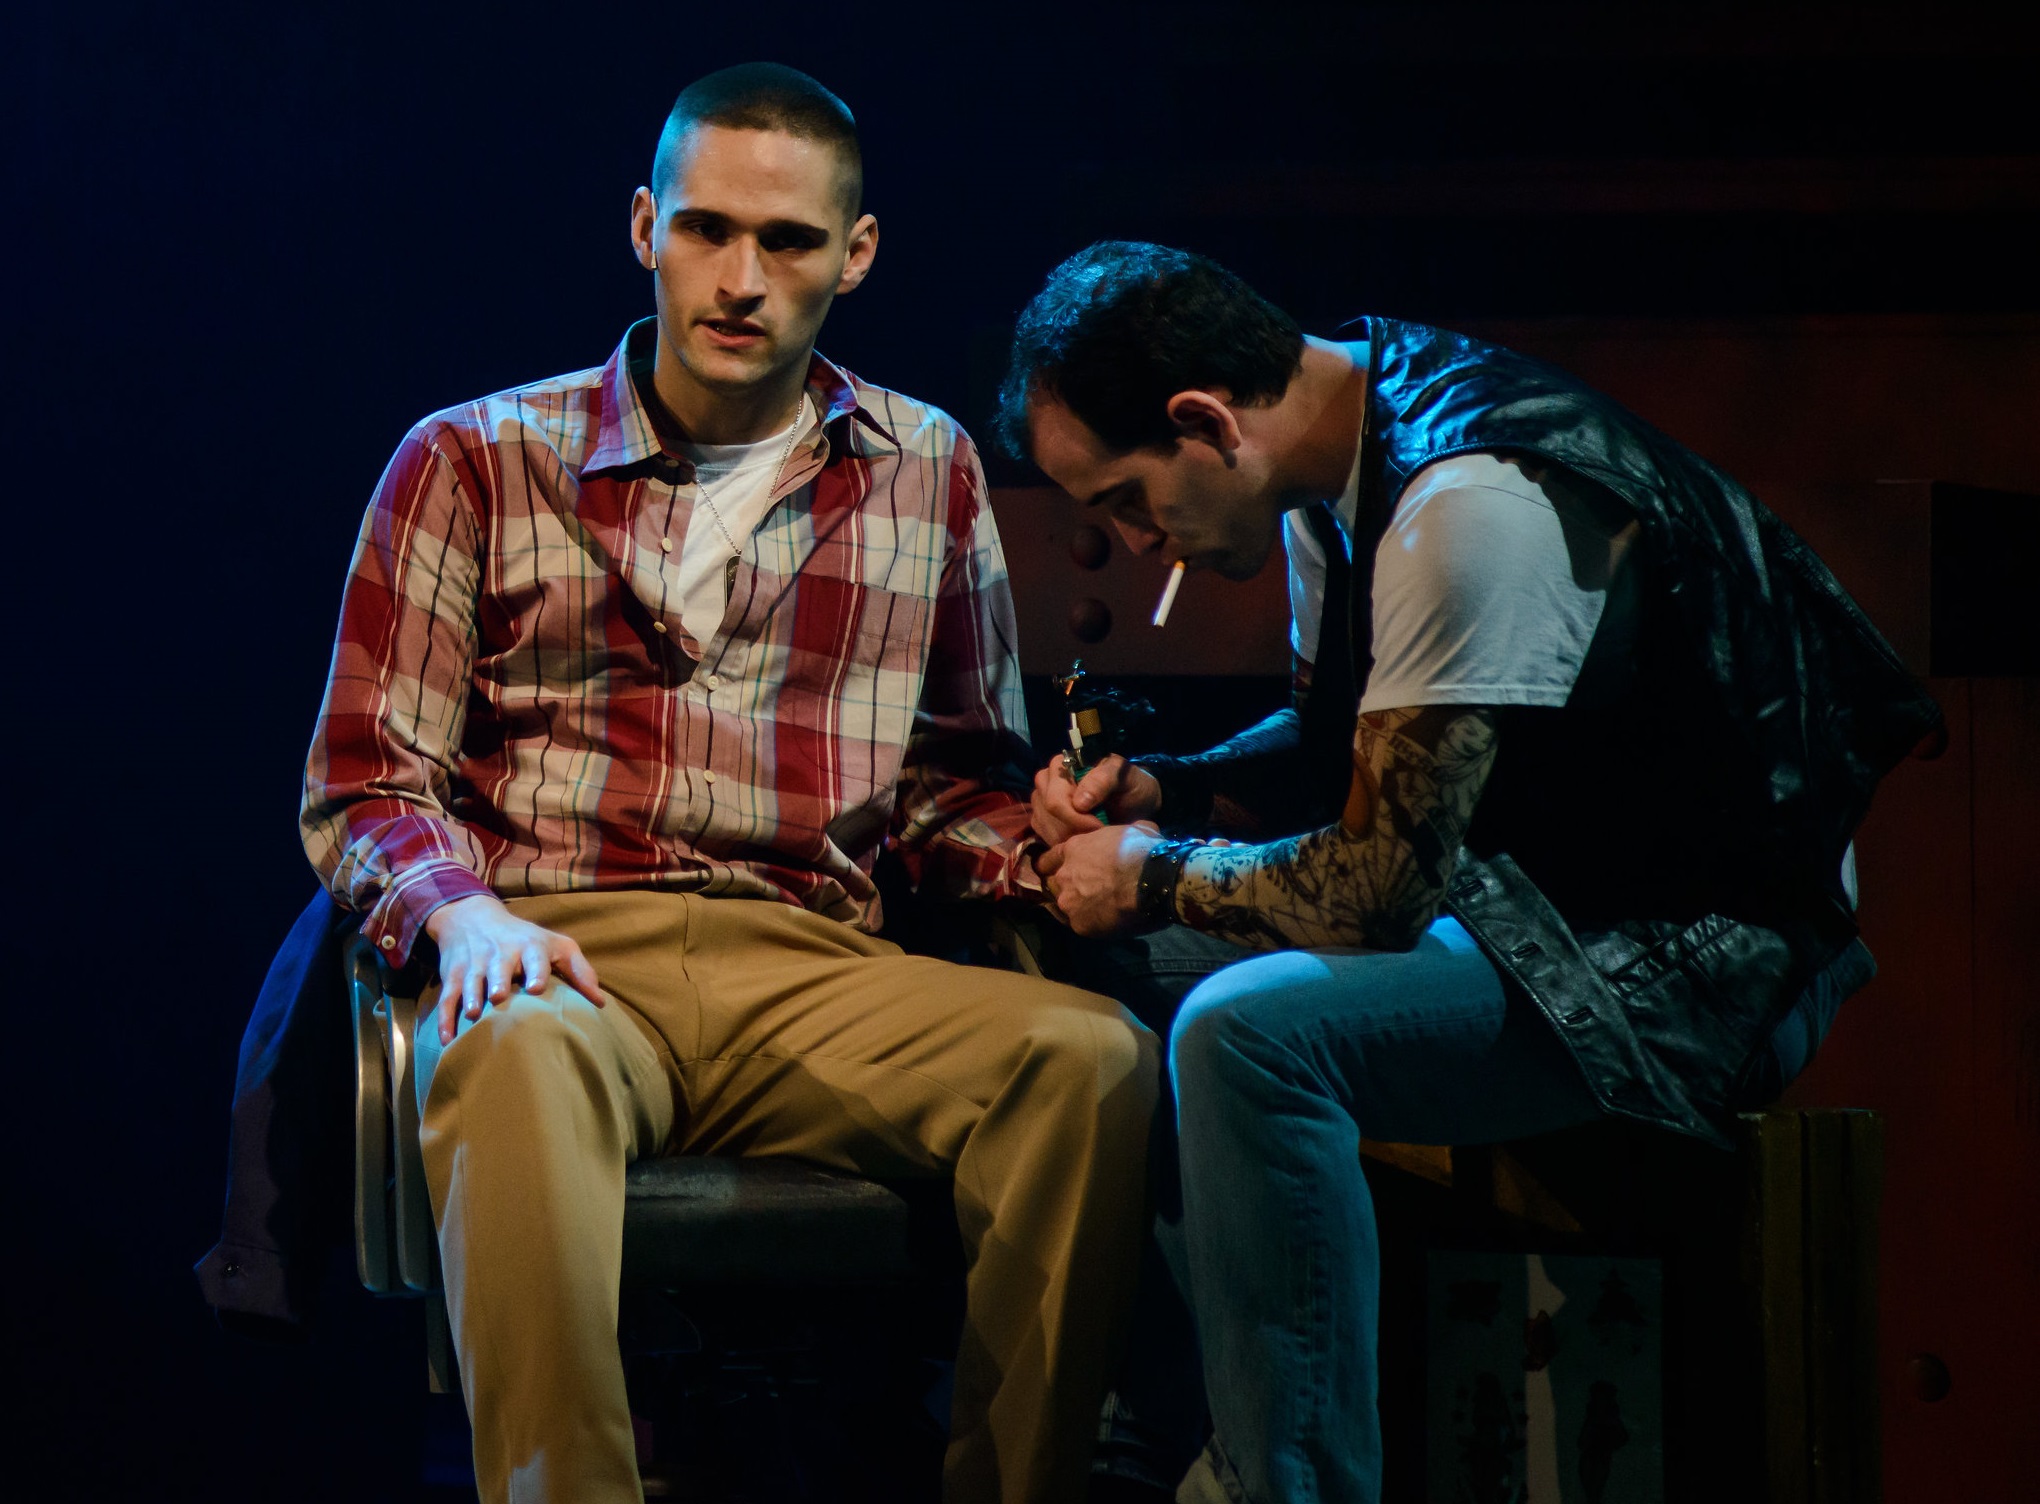 Kyle Segarra as Bernstein, JP Dunphy as rough Tattoo Artist in DOGFIGHT. Photo by Maura McConnell.